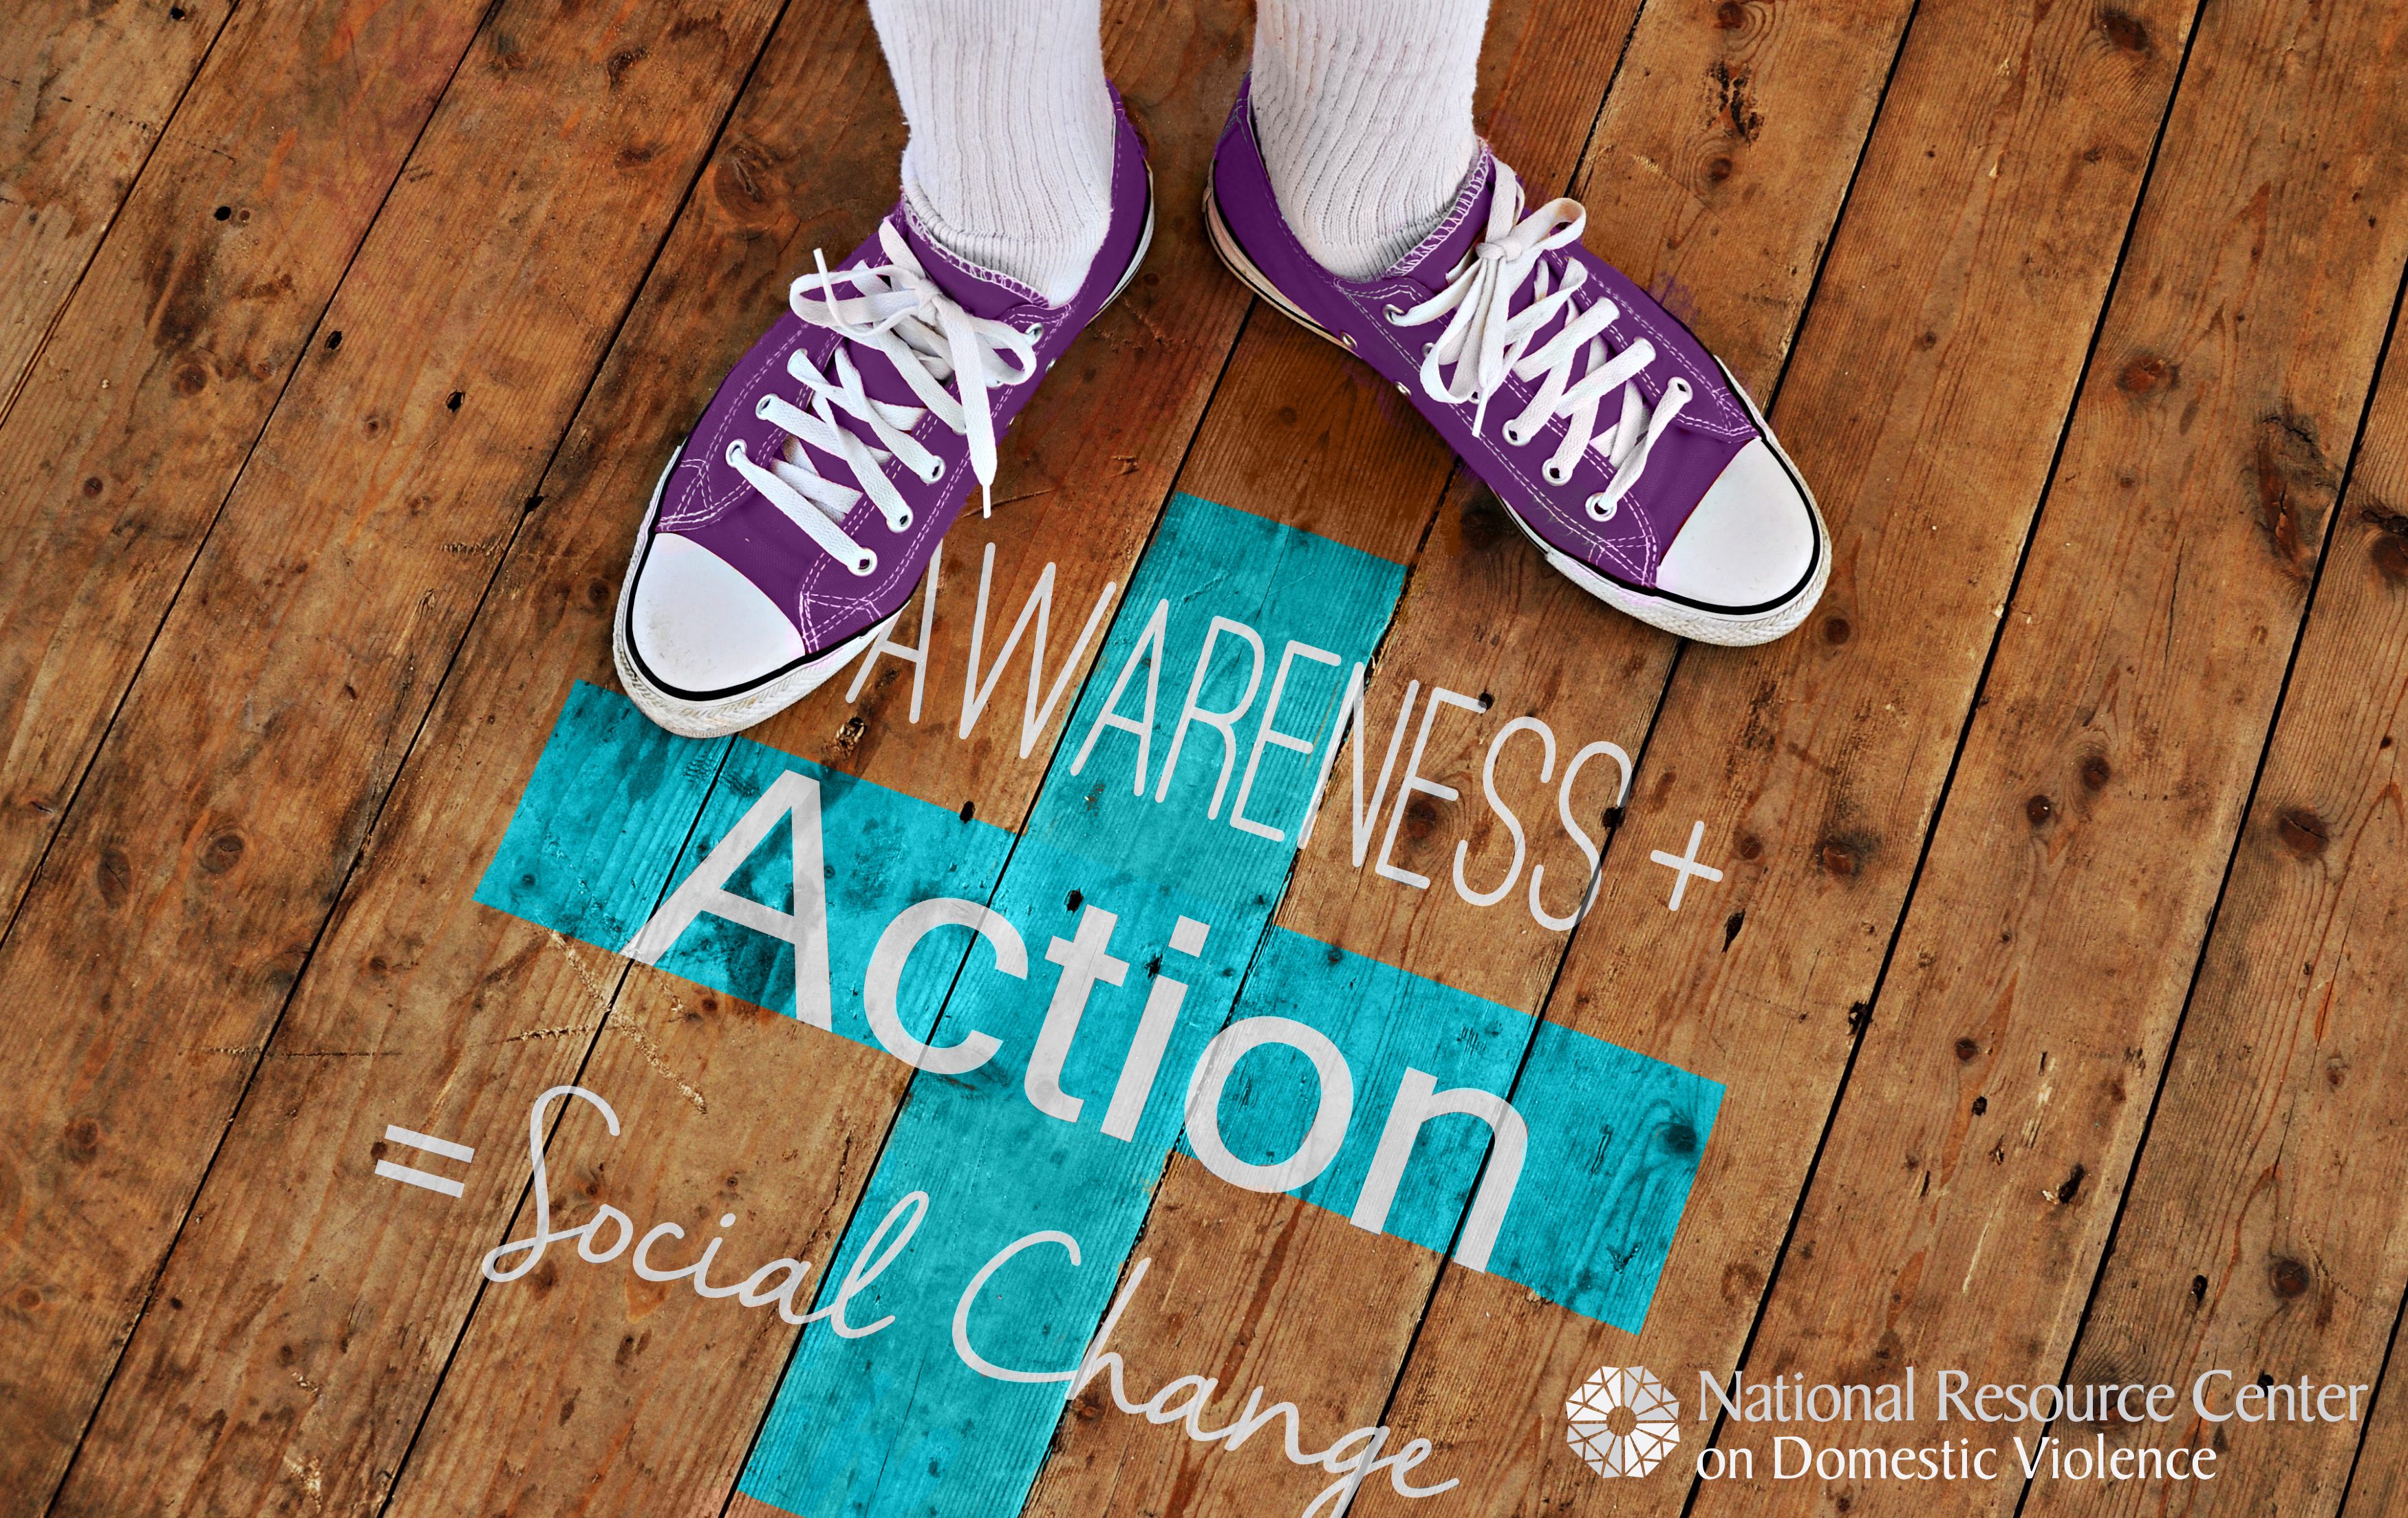 Image of feet on a floor with Awarebess + Action = Social Change logo printed on the floor